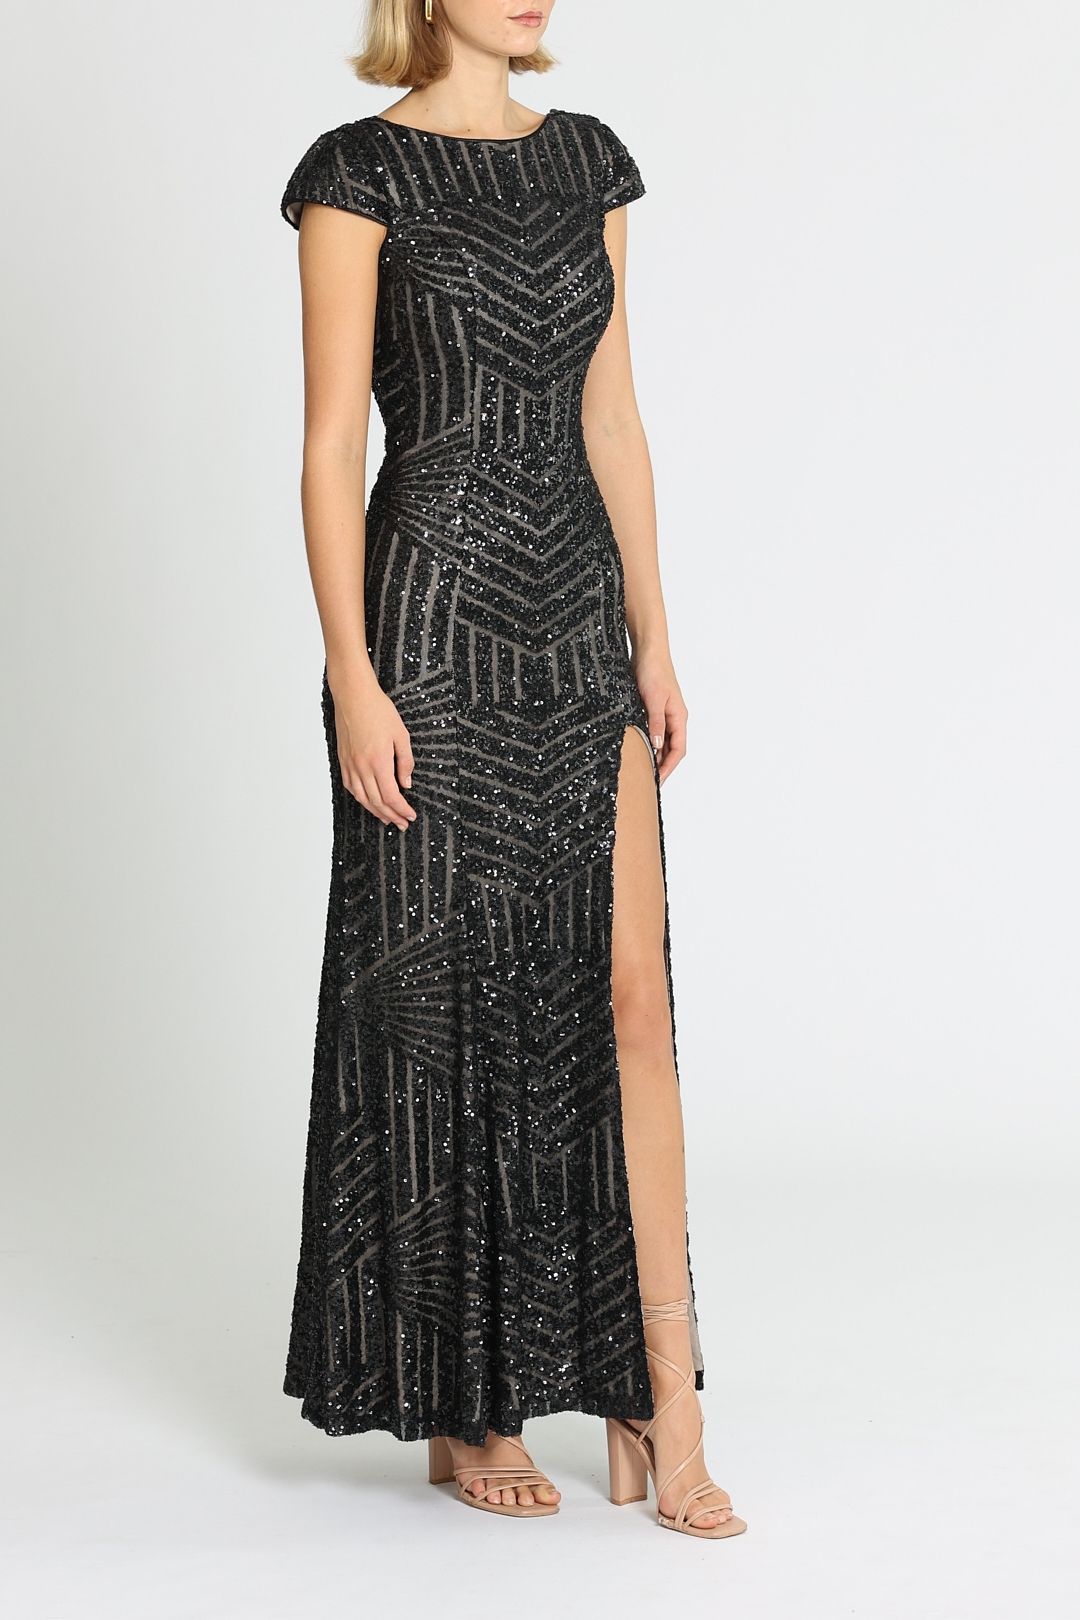 L'Amour Karla Sequin Gown Cap Sleeves